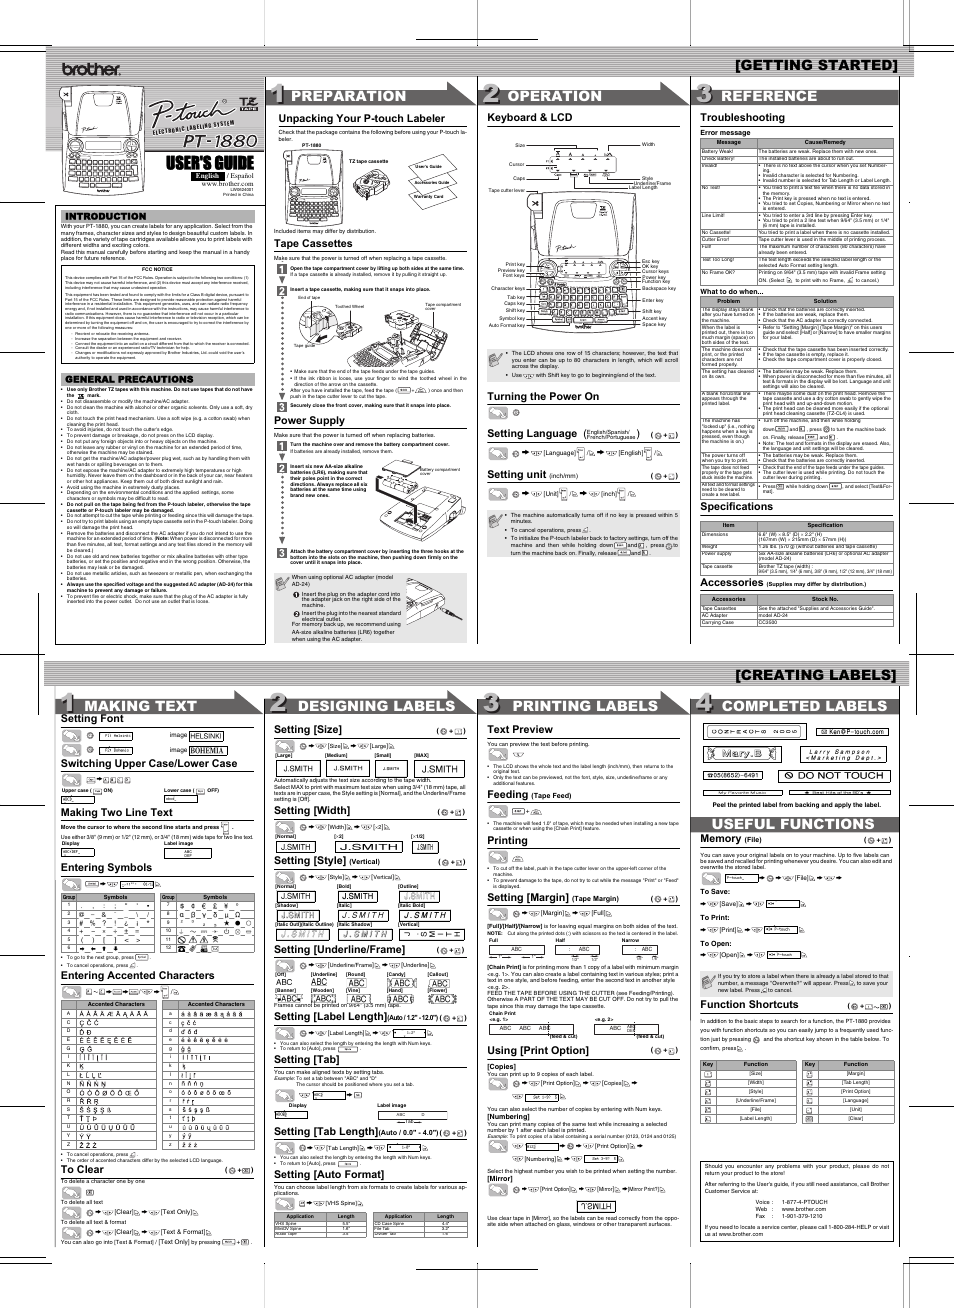 Brother P-TOUCH PT-1880 User Manual | 1 page